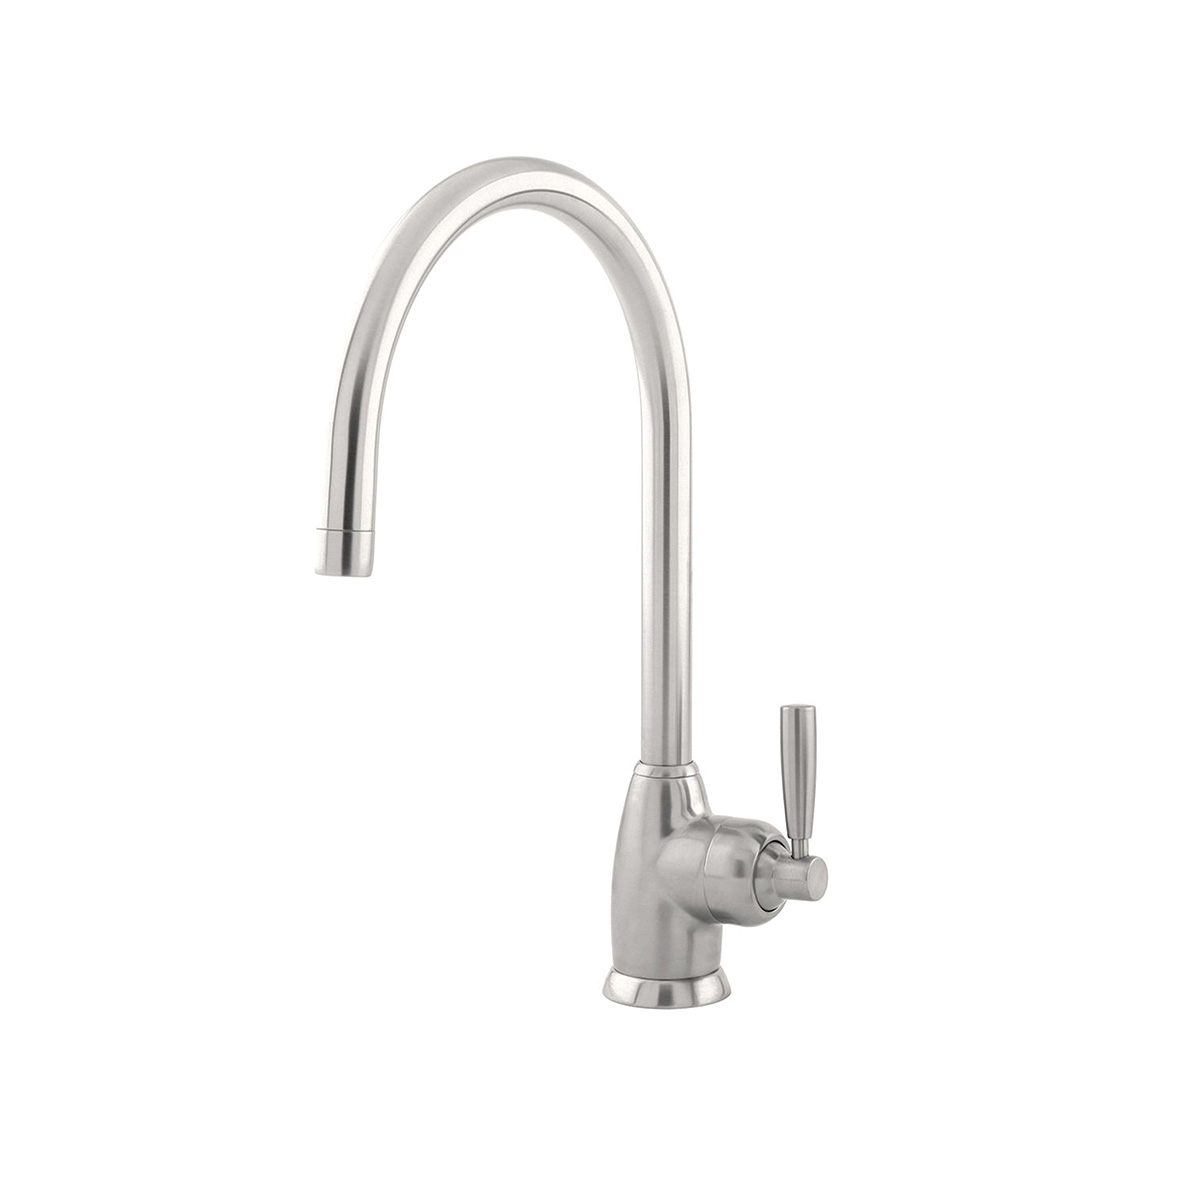 Shaws by Perrin & Rowe Roeburn kitchen mixer in Pewter. Mimas style monobloc kitchen tap AUSH.4841. Distributed in Australia by Luxe by Design, Brisbane.